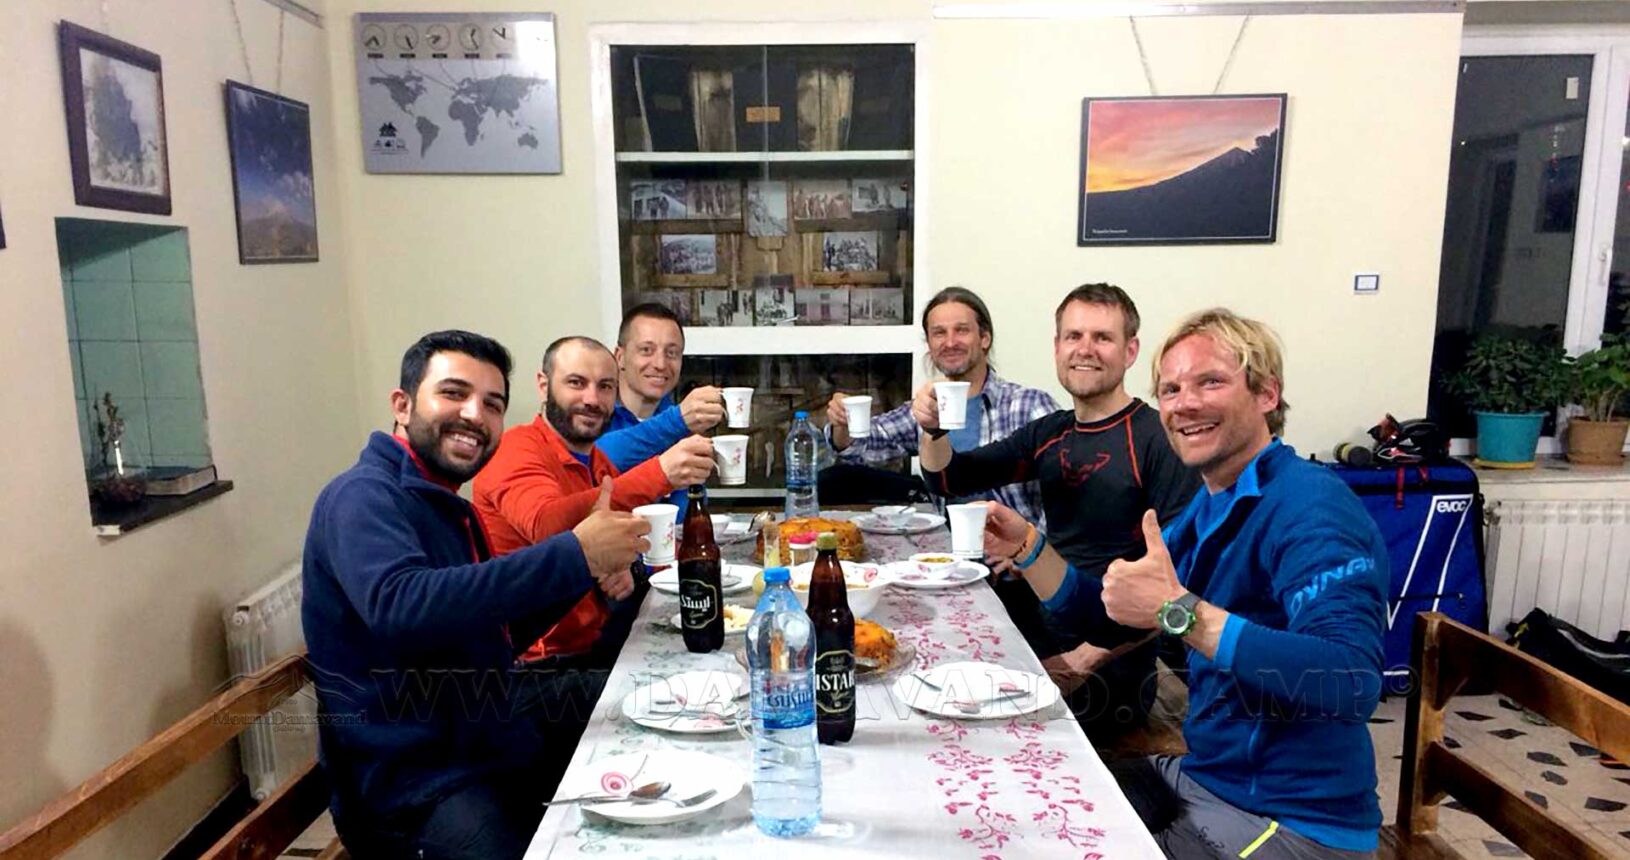 Benedikt Böhm and his team of the Sea to summit project in Iran with Rasoul Faramarzpour at Camp 1 of damavand